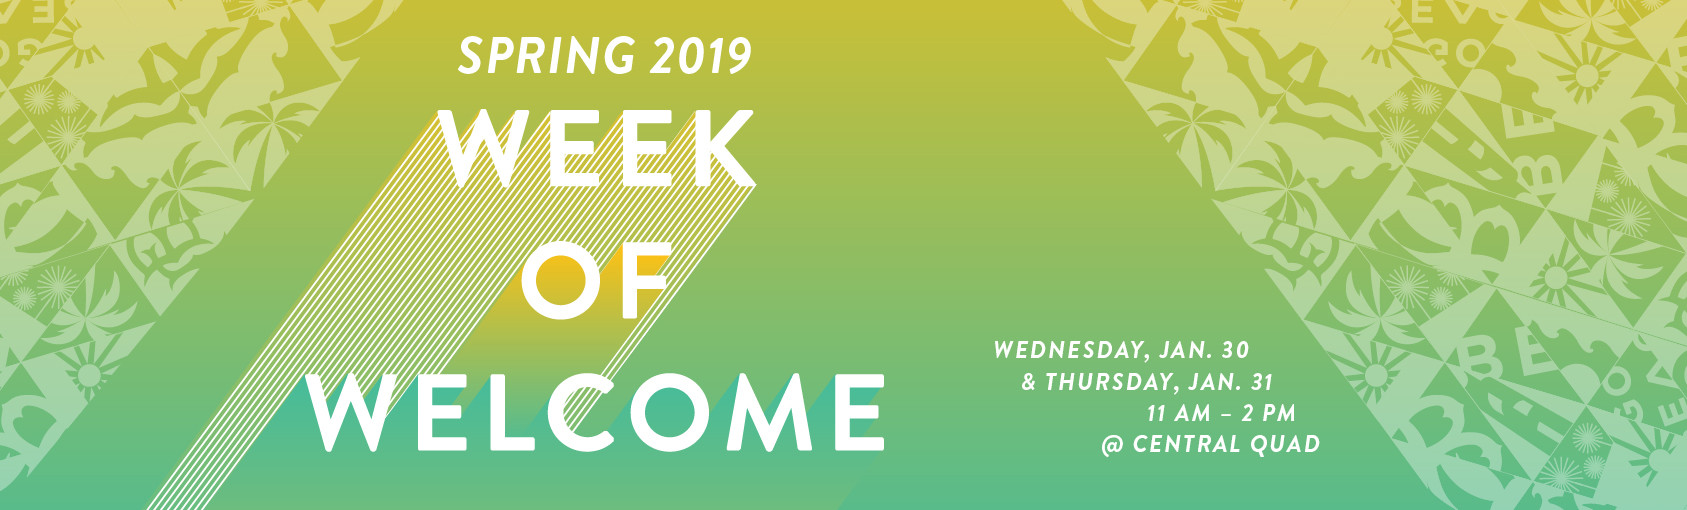 Week of Welcome Spring 2019 Banner